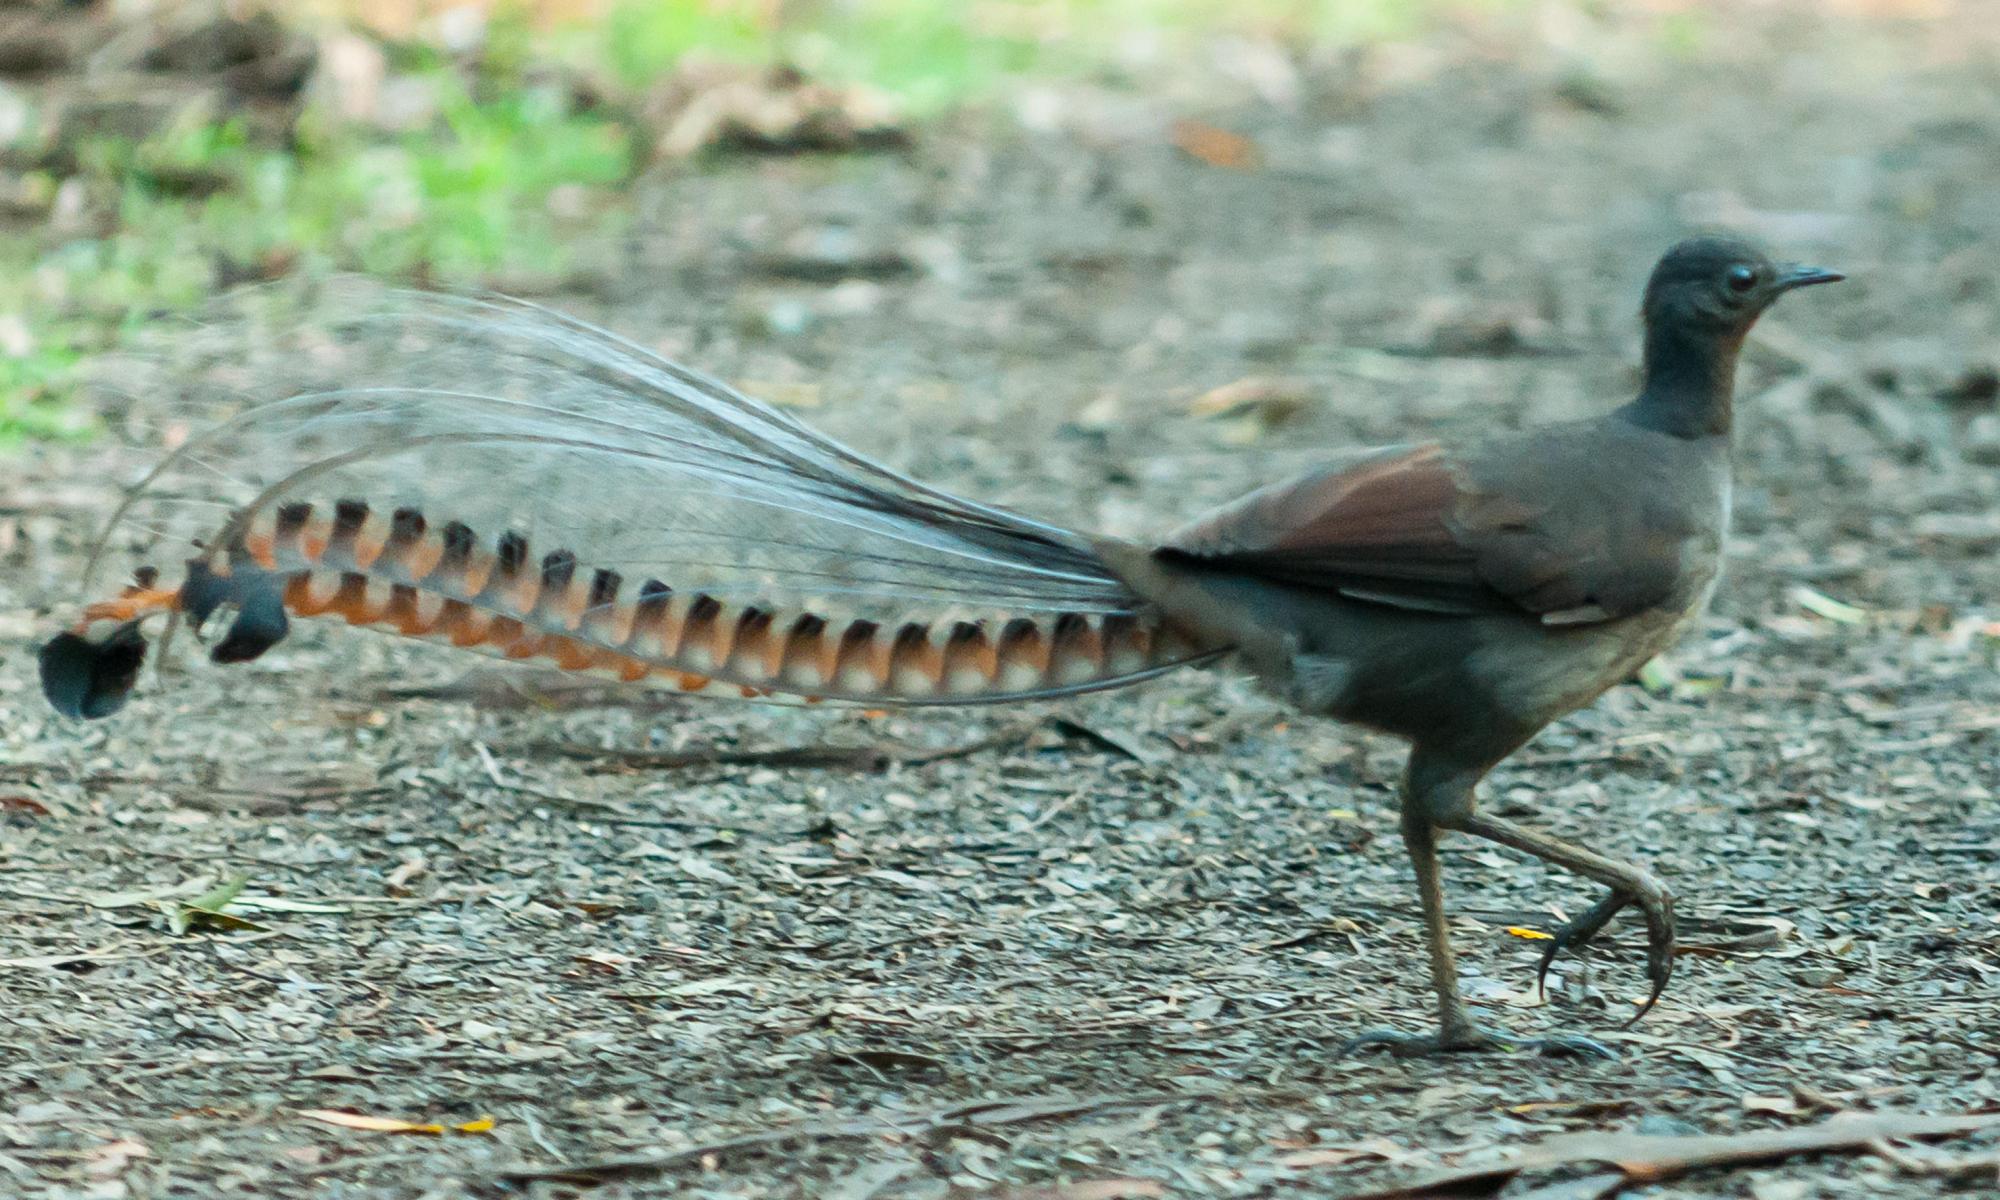 Lyrebird may join threatened species, as scale of bird habitat lost to bushfires emerges